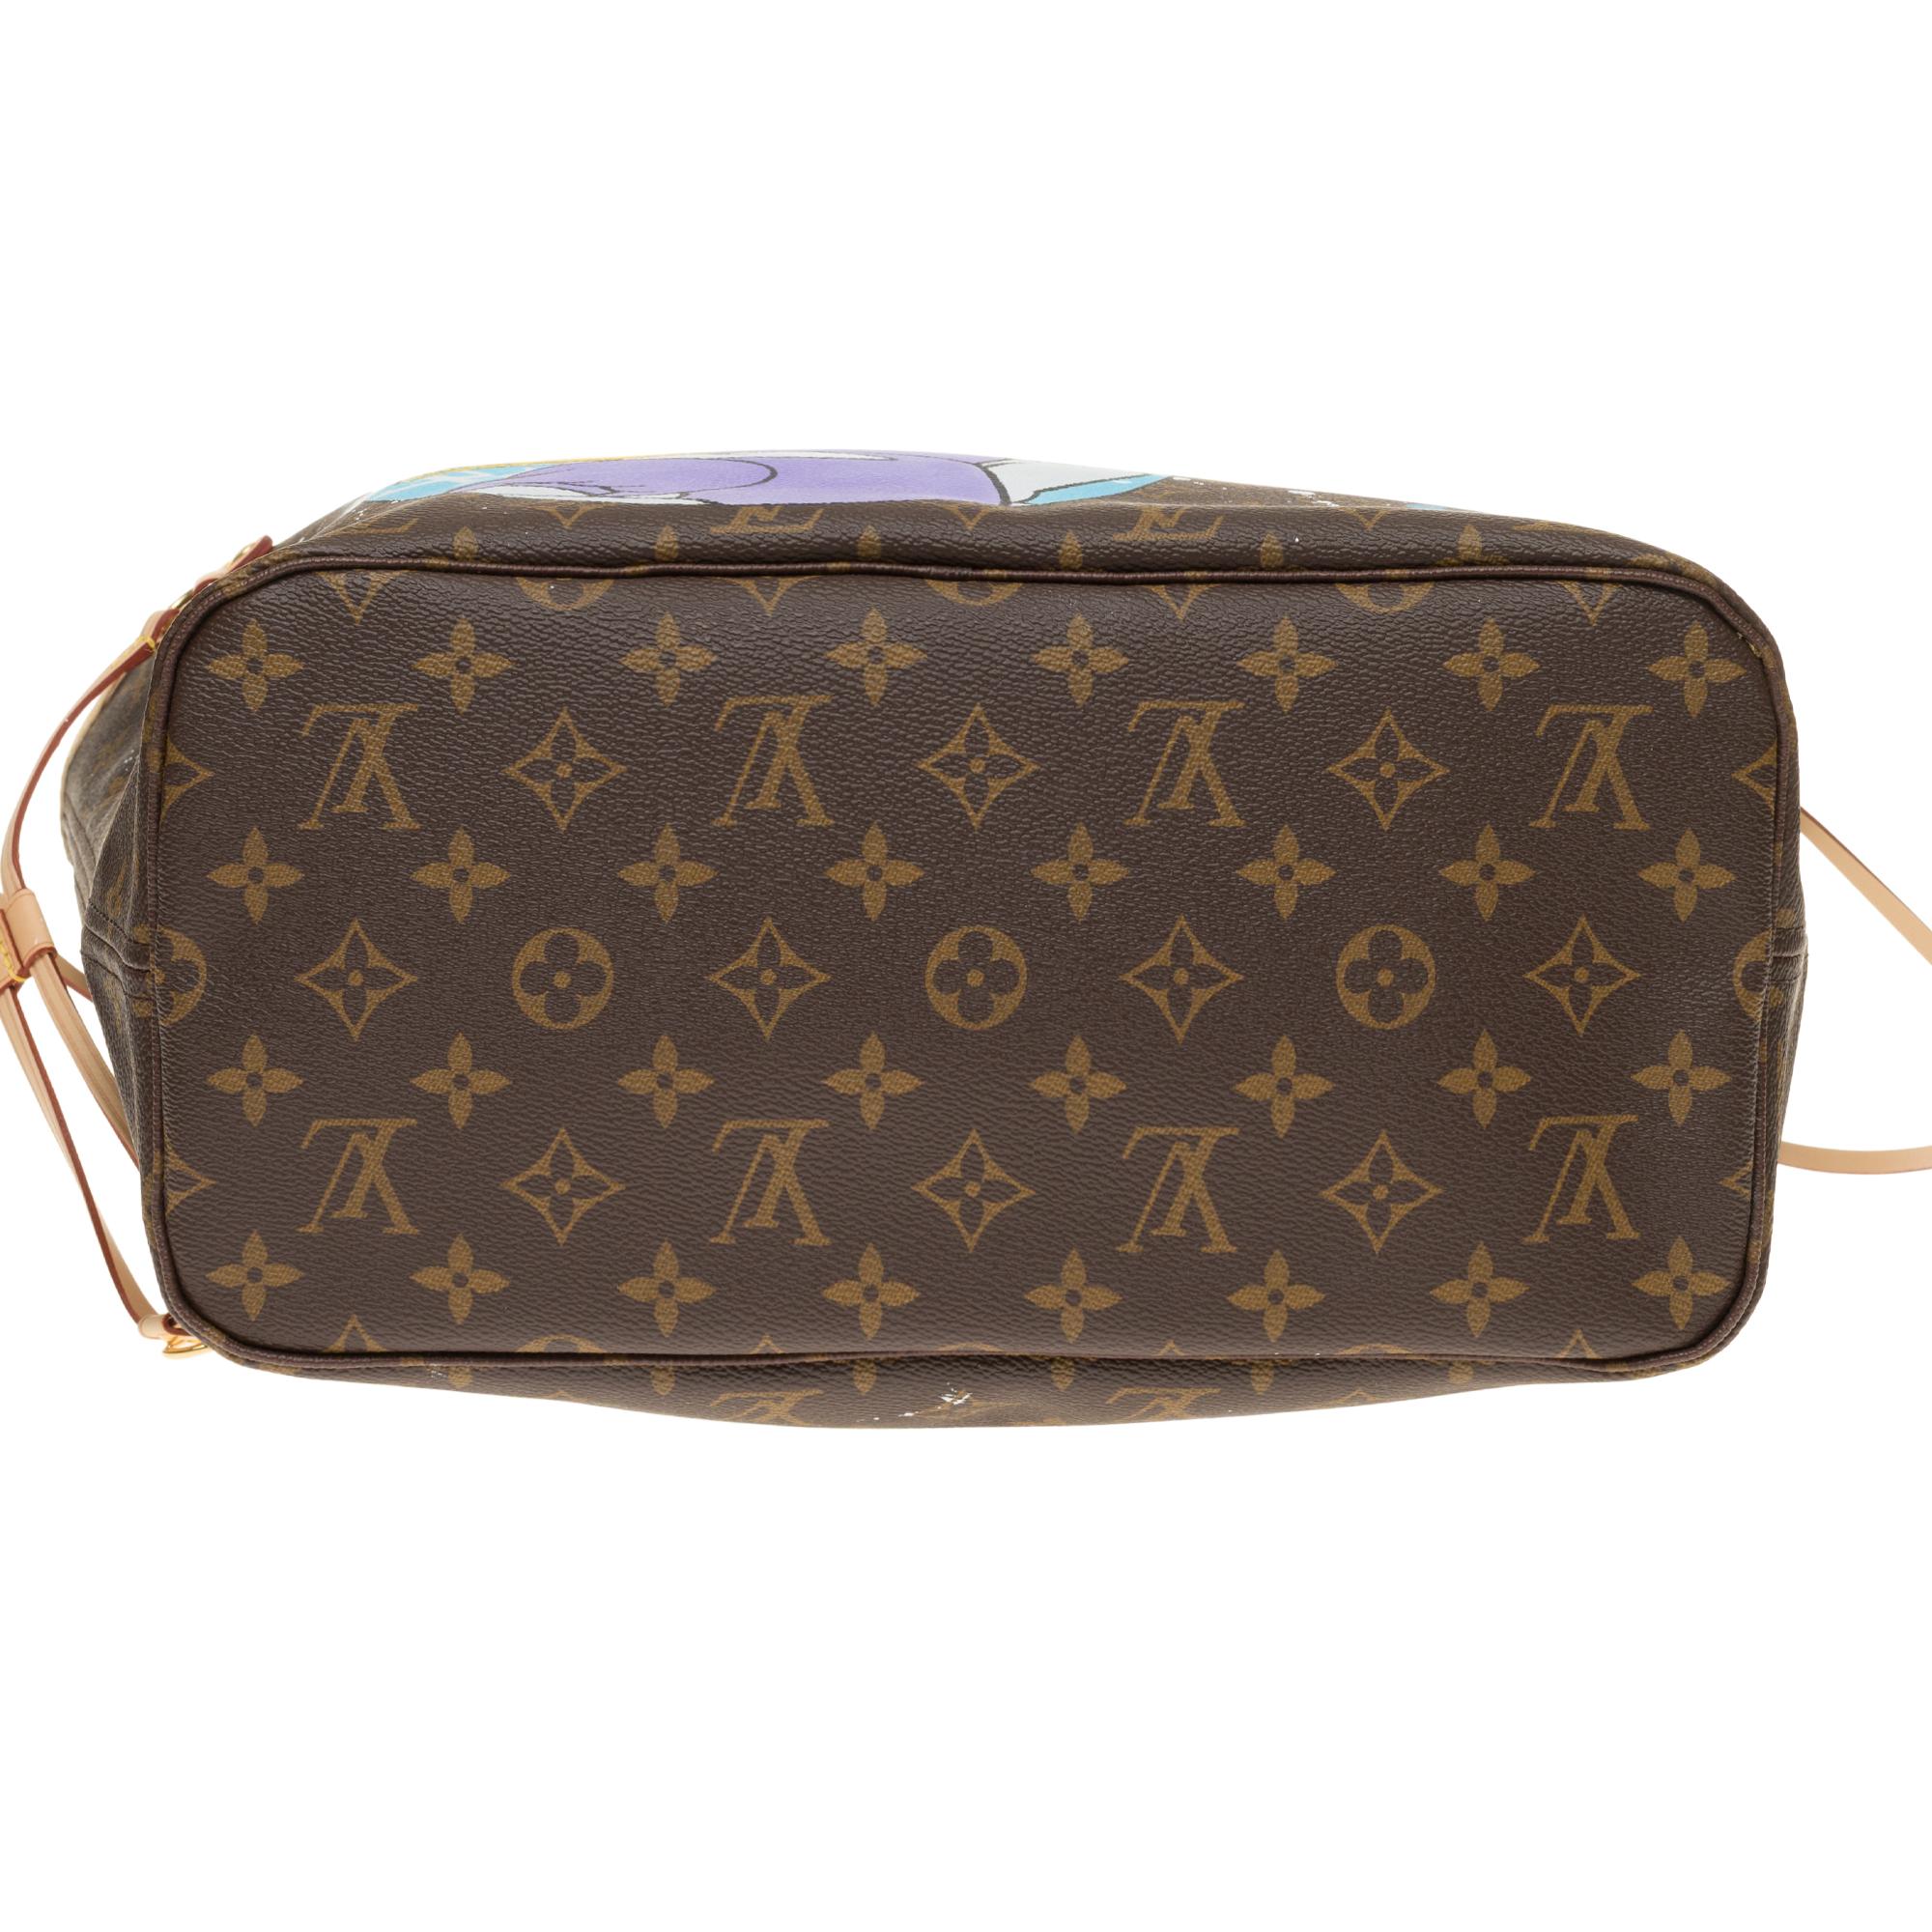 Neverfull MM handbag in Monogram canvas with pouch customized 